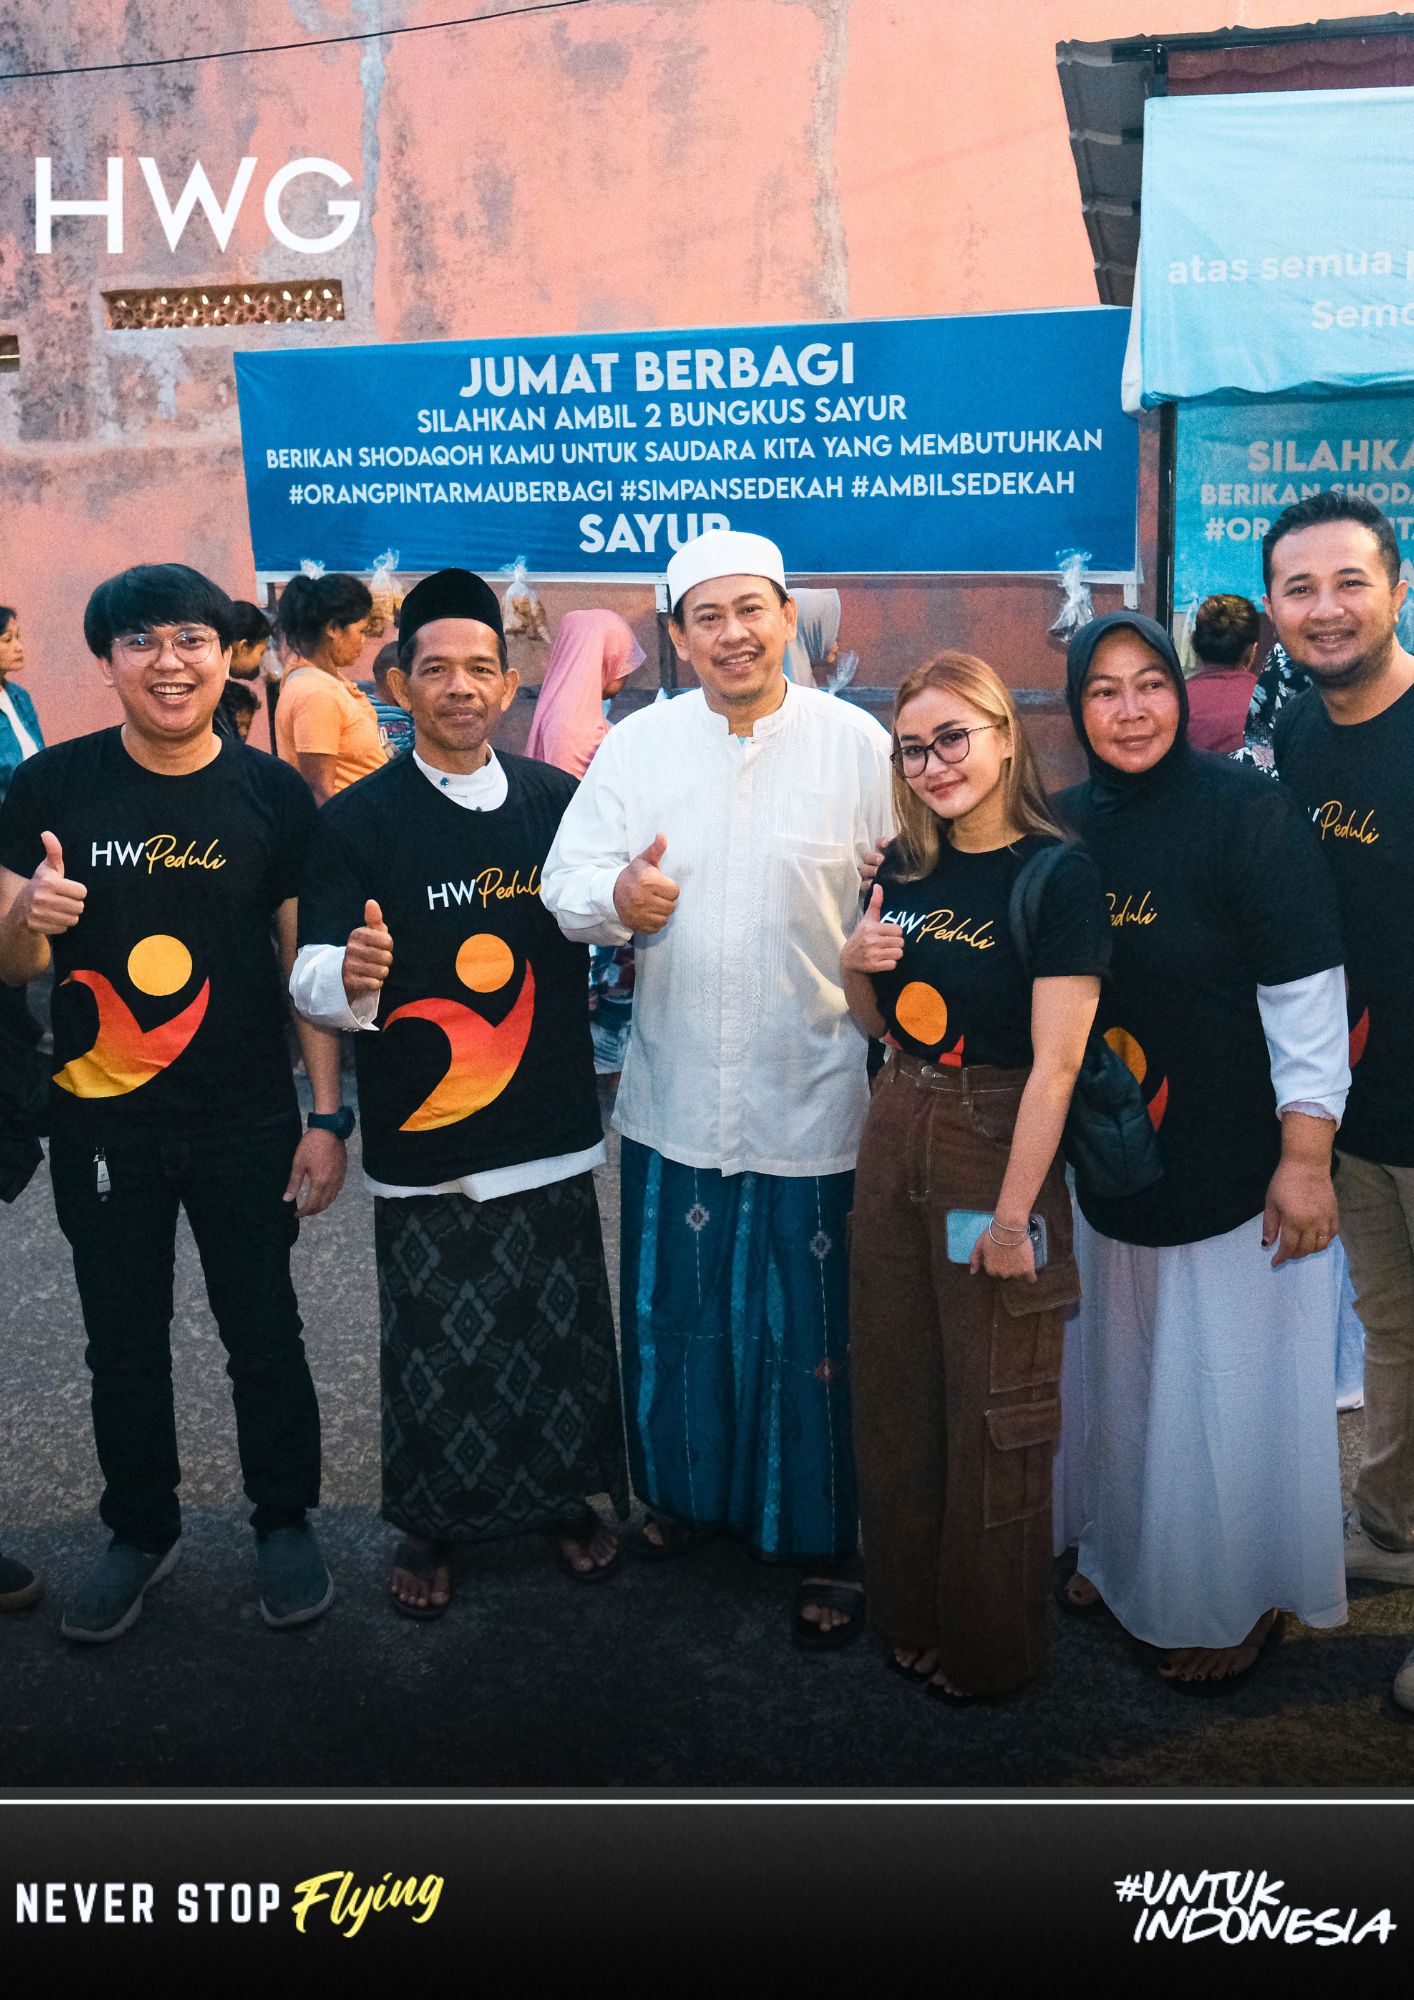 HW Peduli and The Amir Foundation spread their kindness with Giving Friday